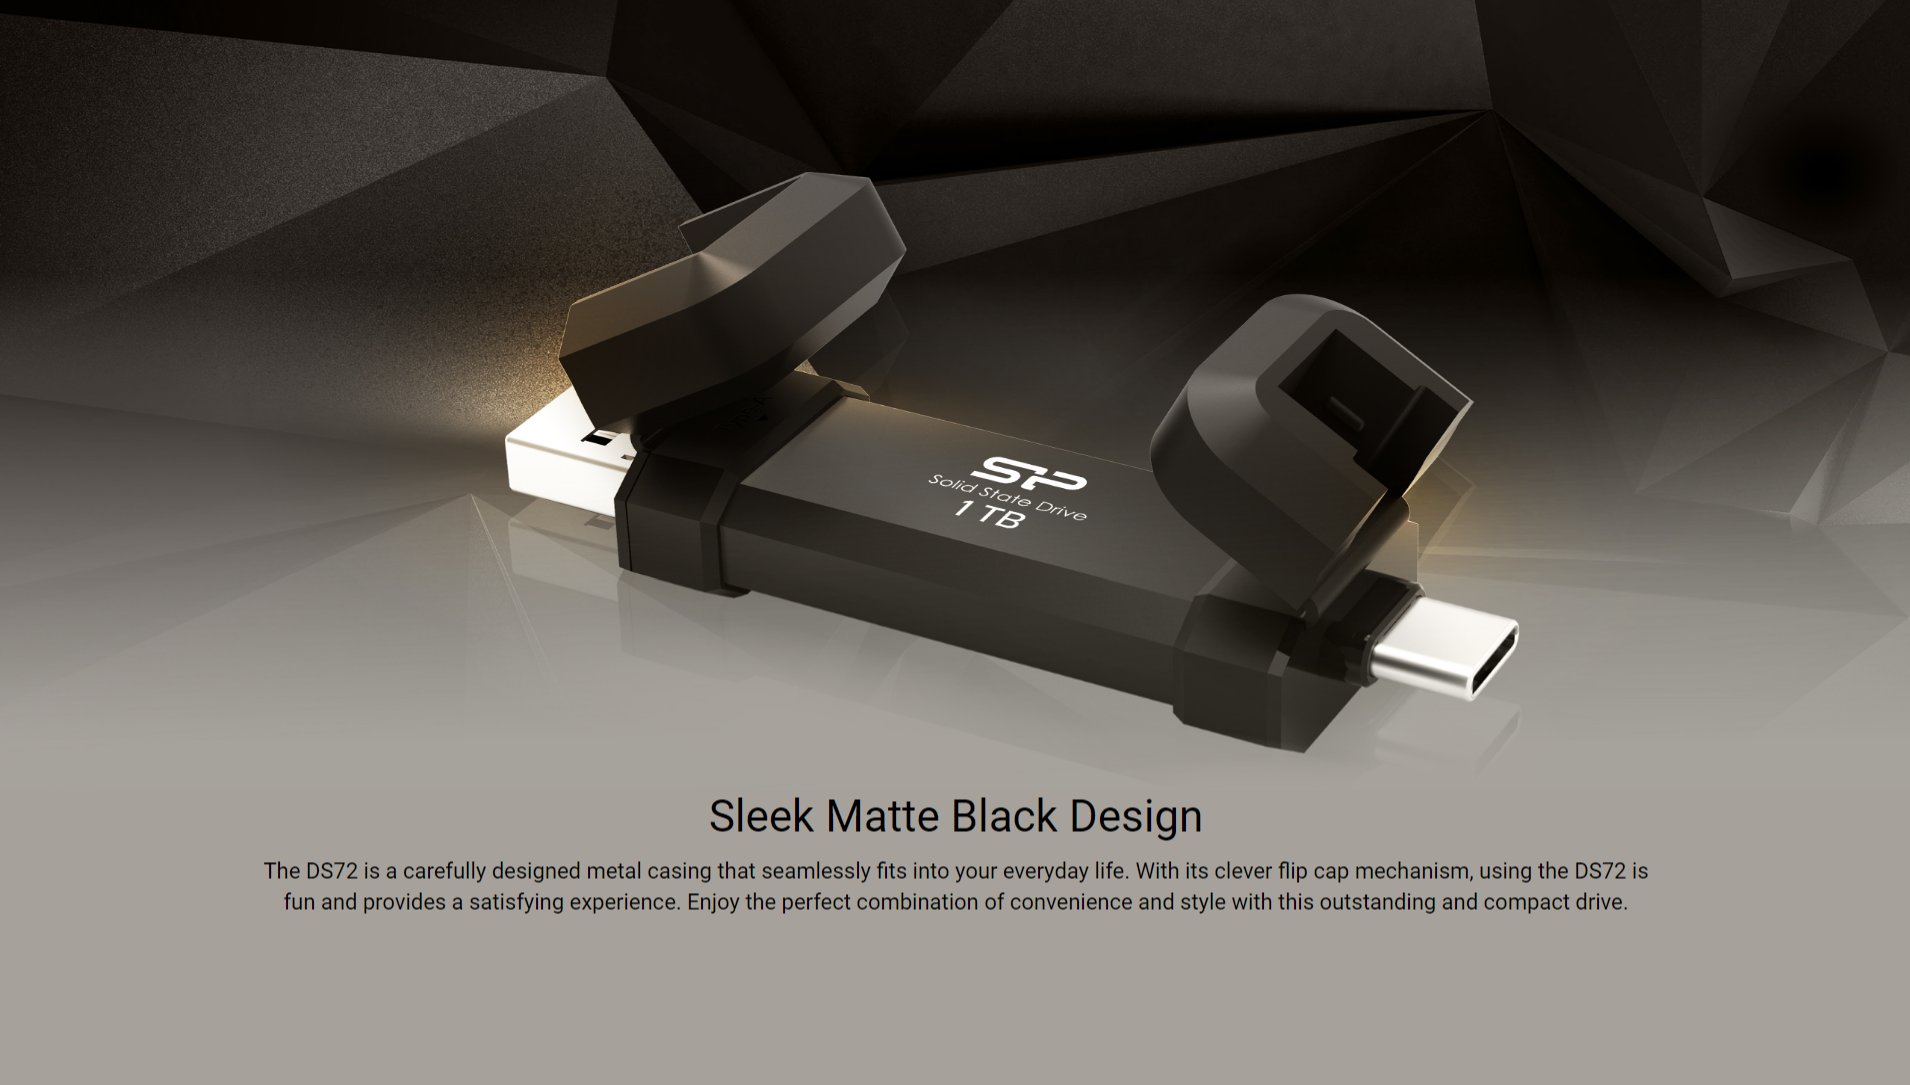 A large marketing image providing additional information about the product Silicon Power DS72 1TB USB Type C & A 3.2 Gen 2 SSD Flash Drive - Black - Additional alt info not provided